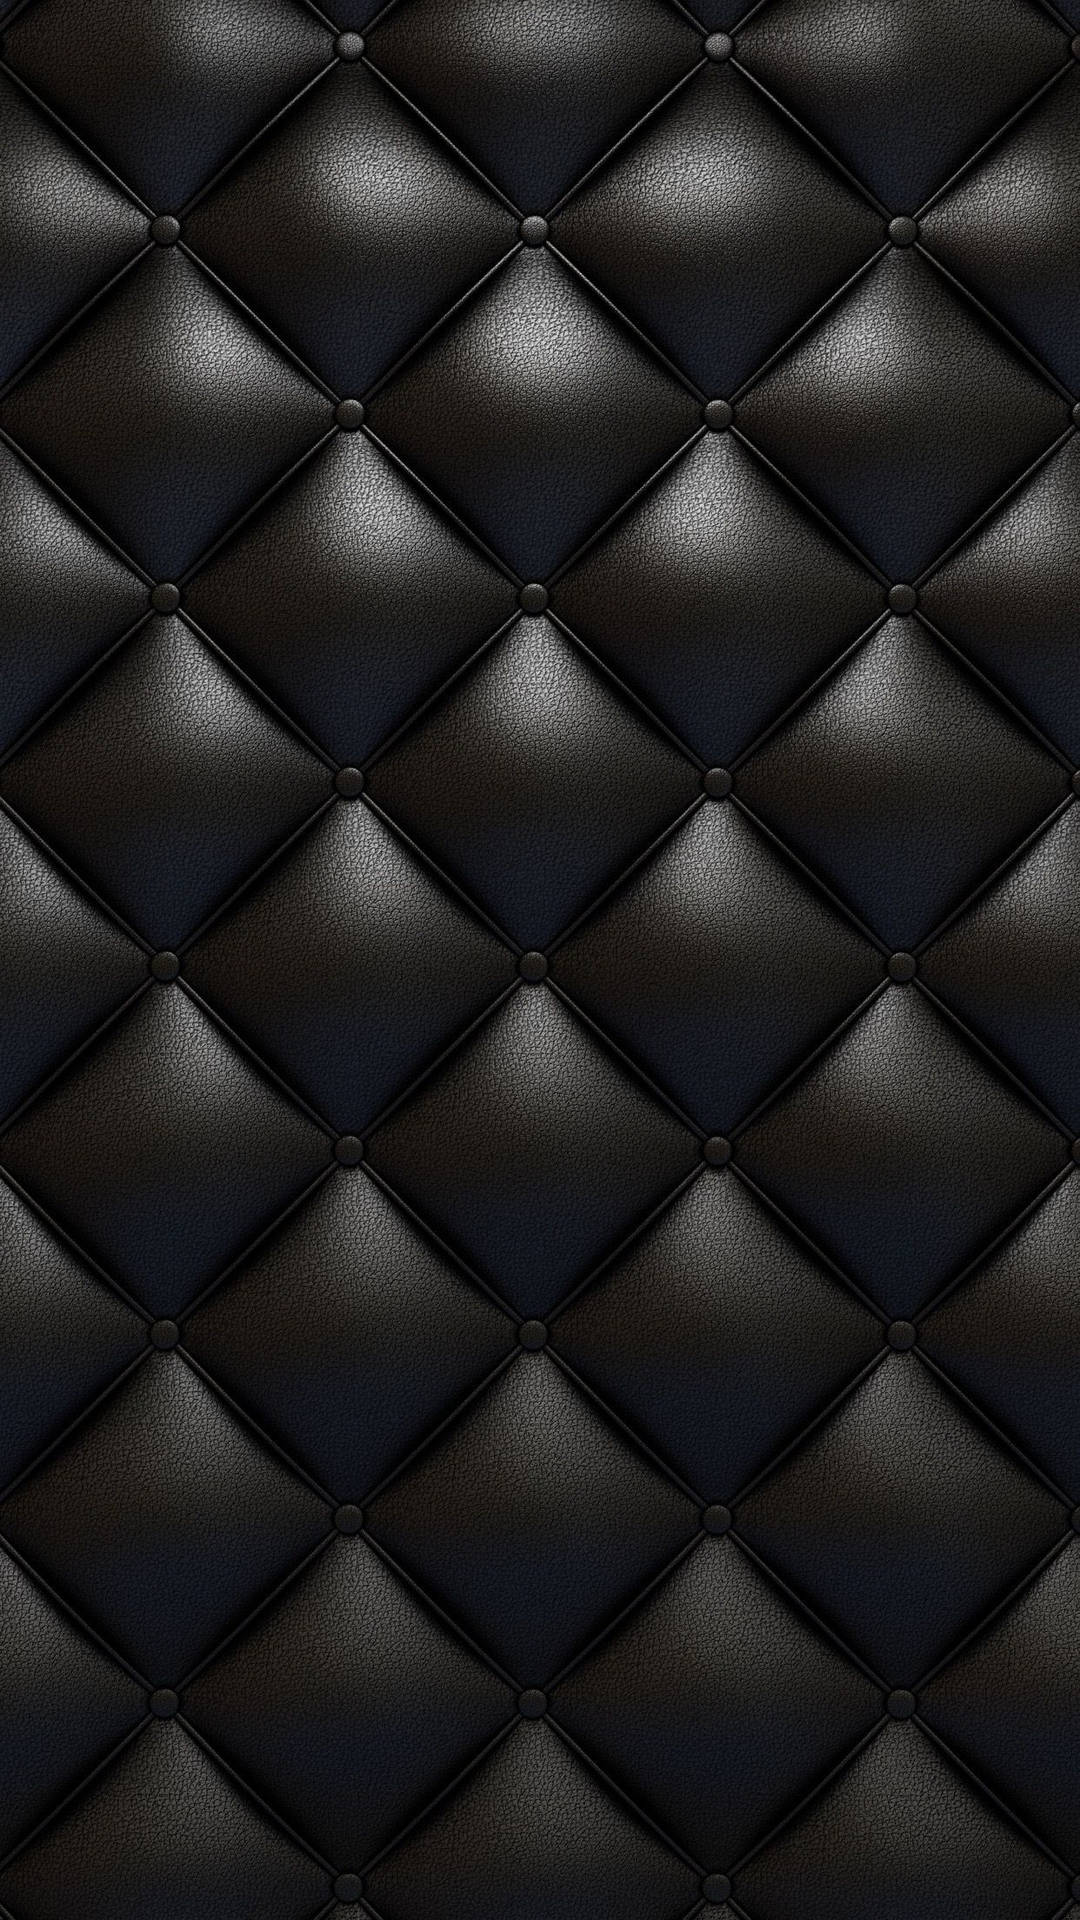 Top 999+ Black Leather Iphone Wallpaper Full HD, 4K✅Free to Use